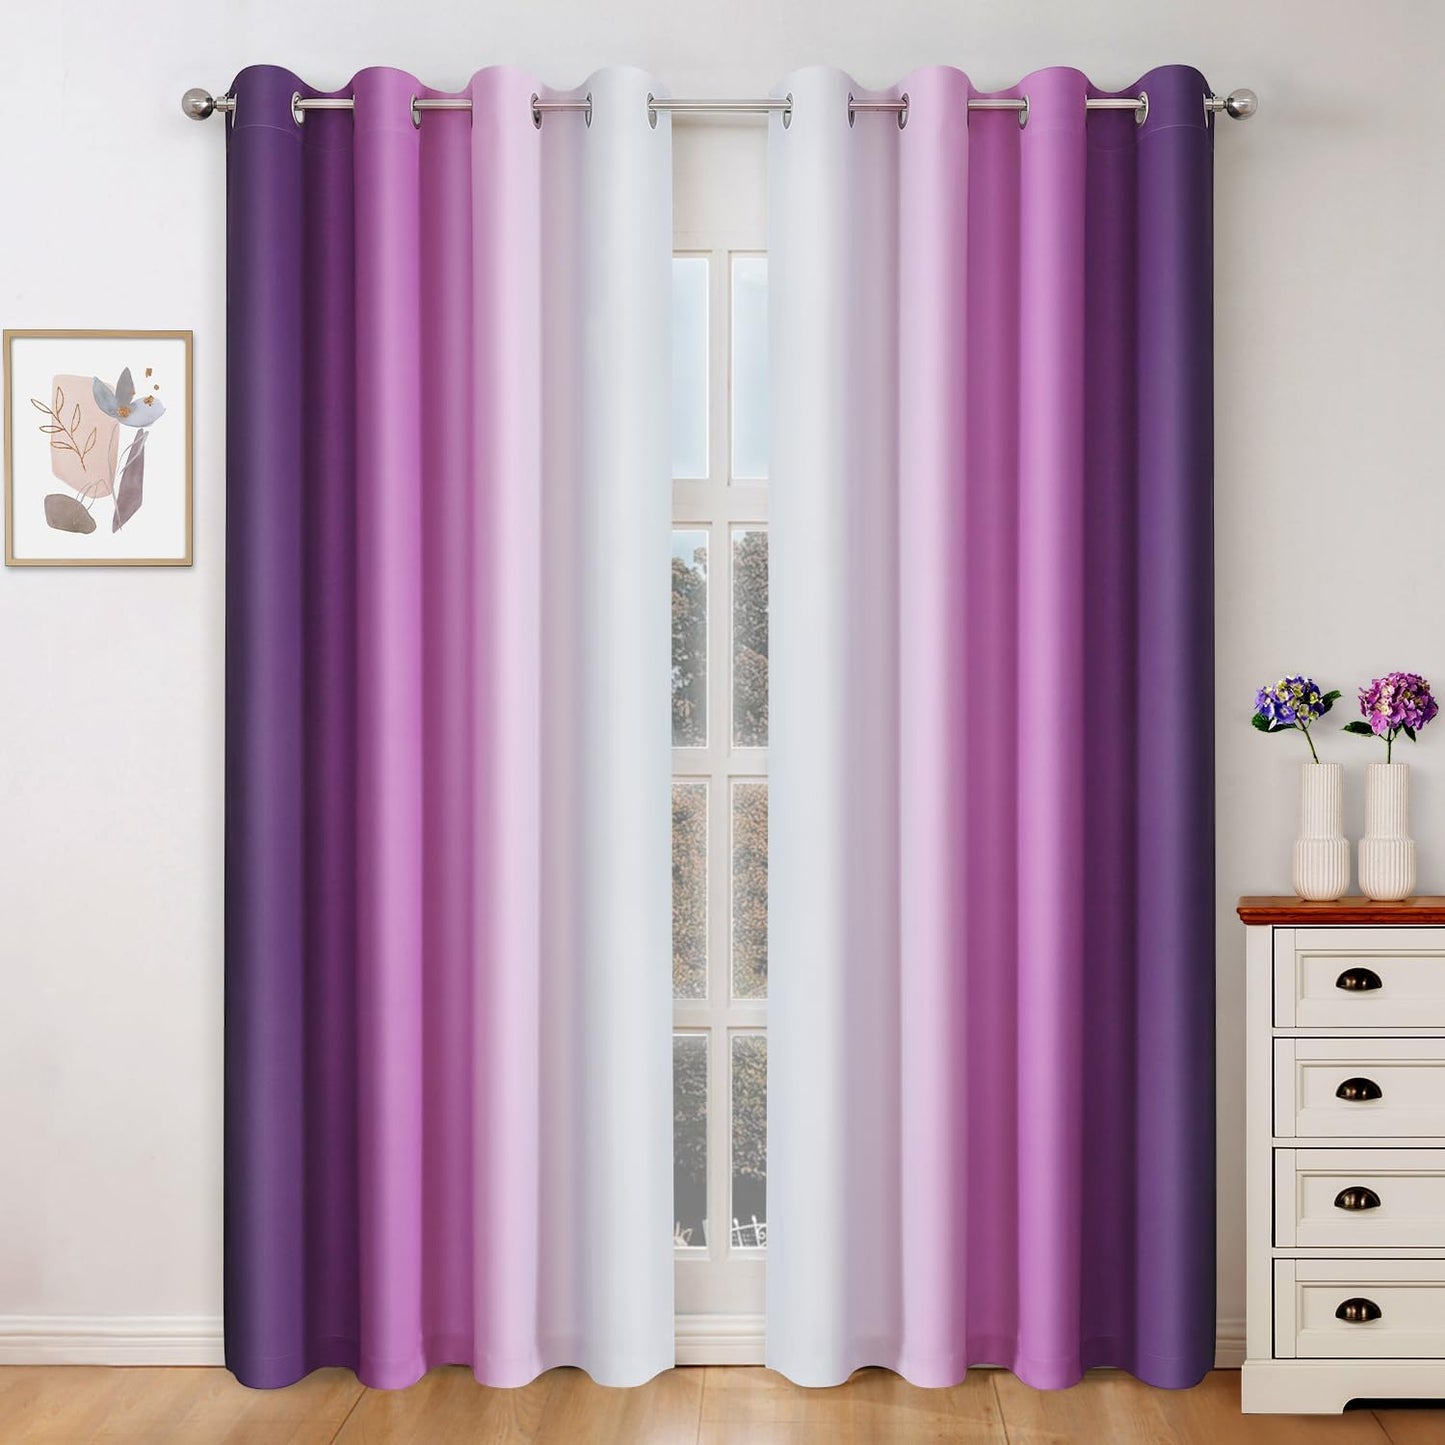 HOMEIDEAS Navy Blue Ombre Blackout Curtains 52 X 84 Inch Length Gradient Room Darkening Thermal Insulated Energy Saving Grommet 2 Panels Window Drapes for Living Room/Bedroom  HOMEIDEAS Purple 1 52"W X 96"L 